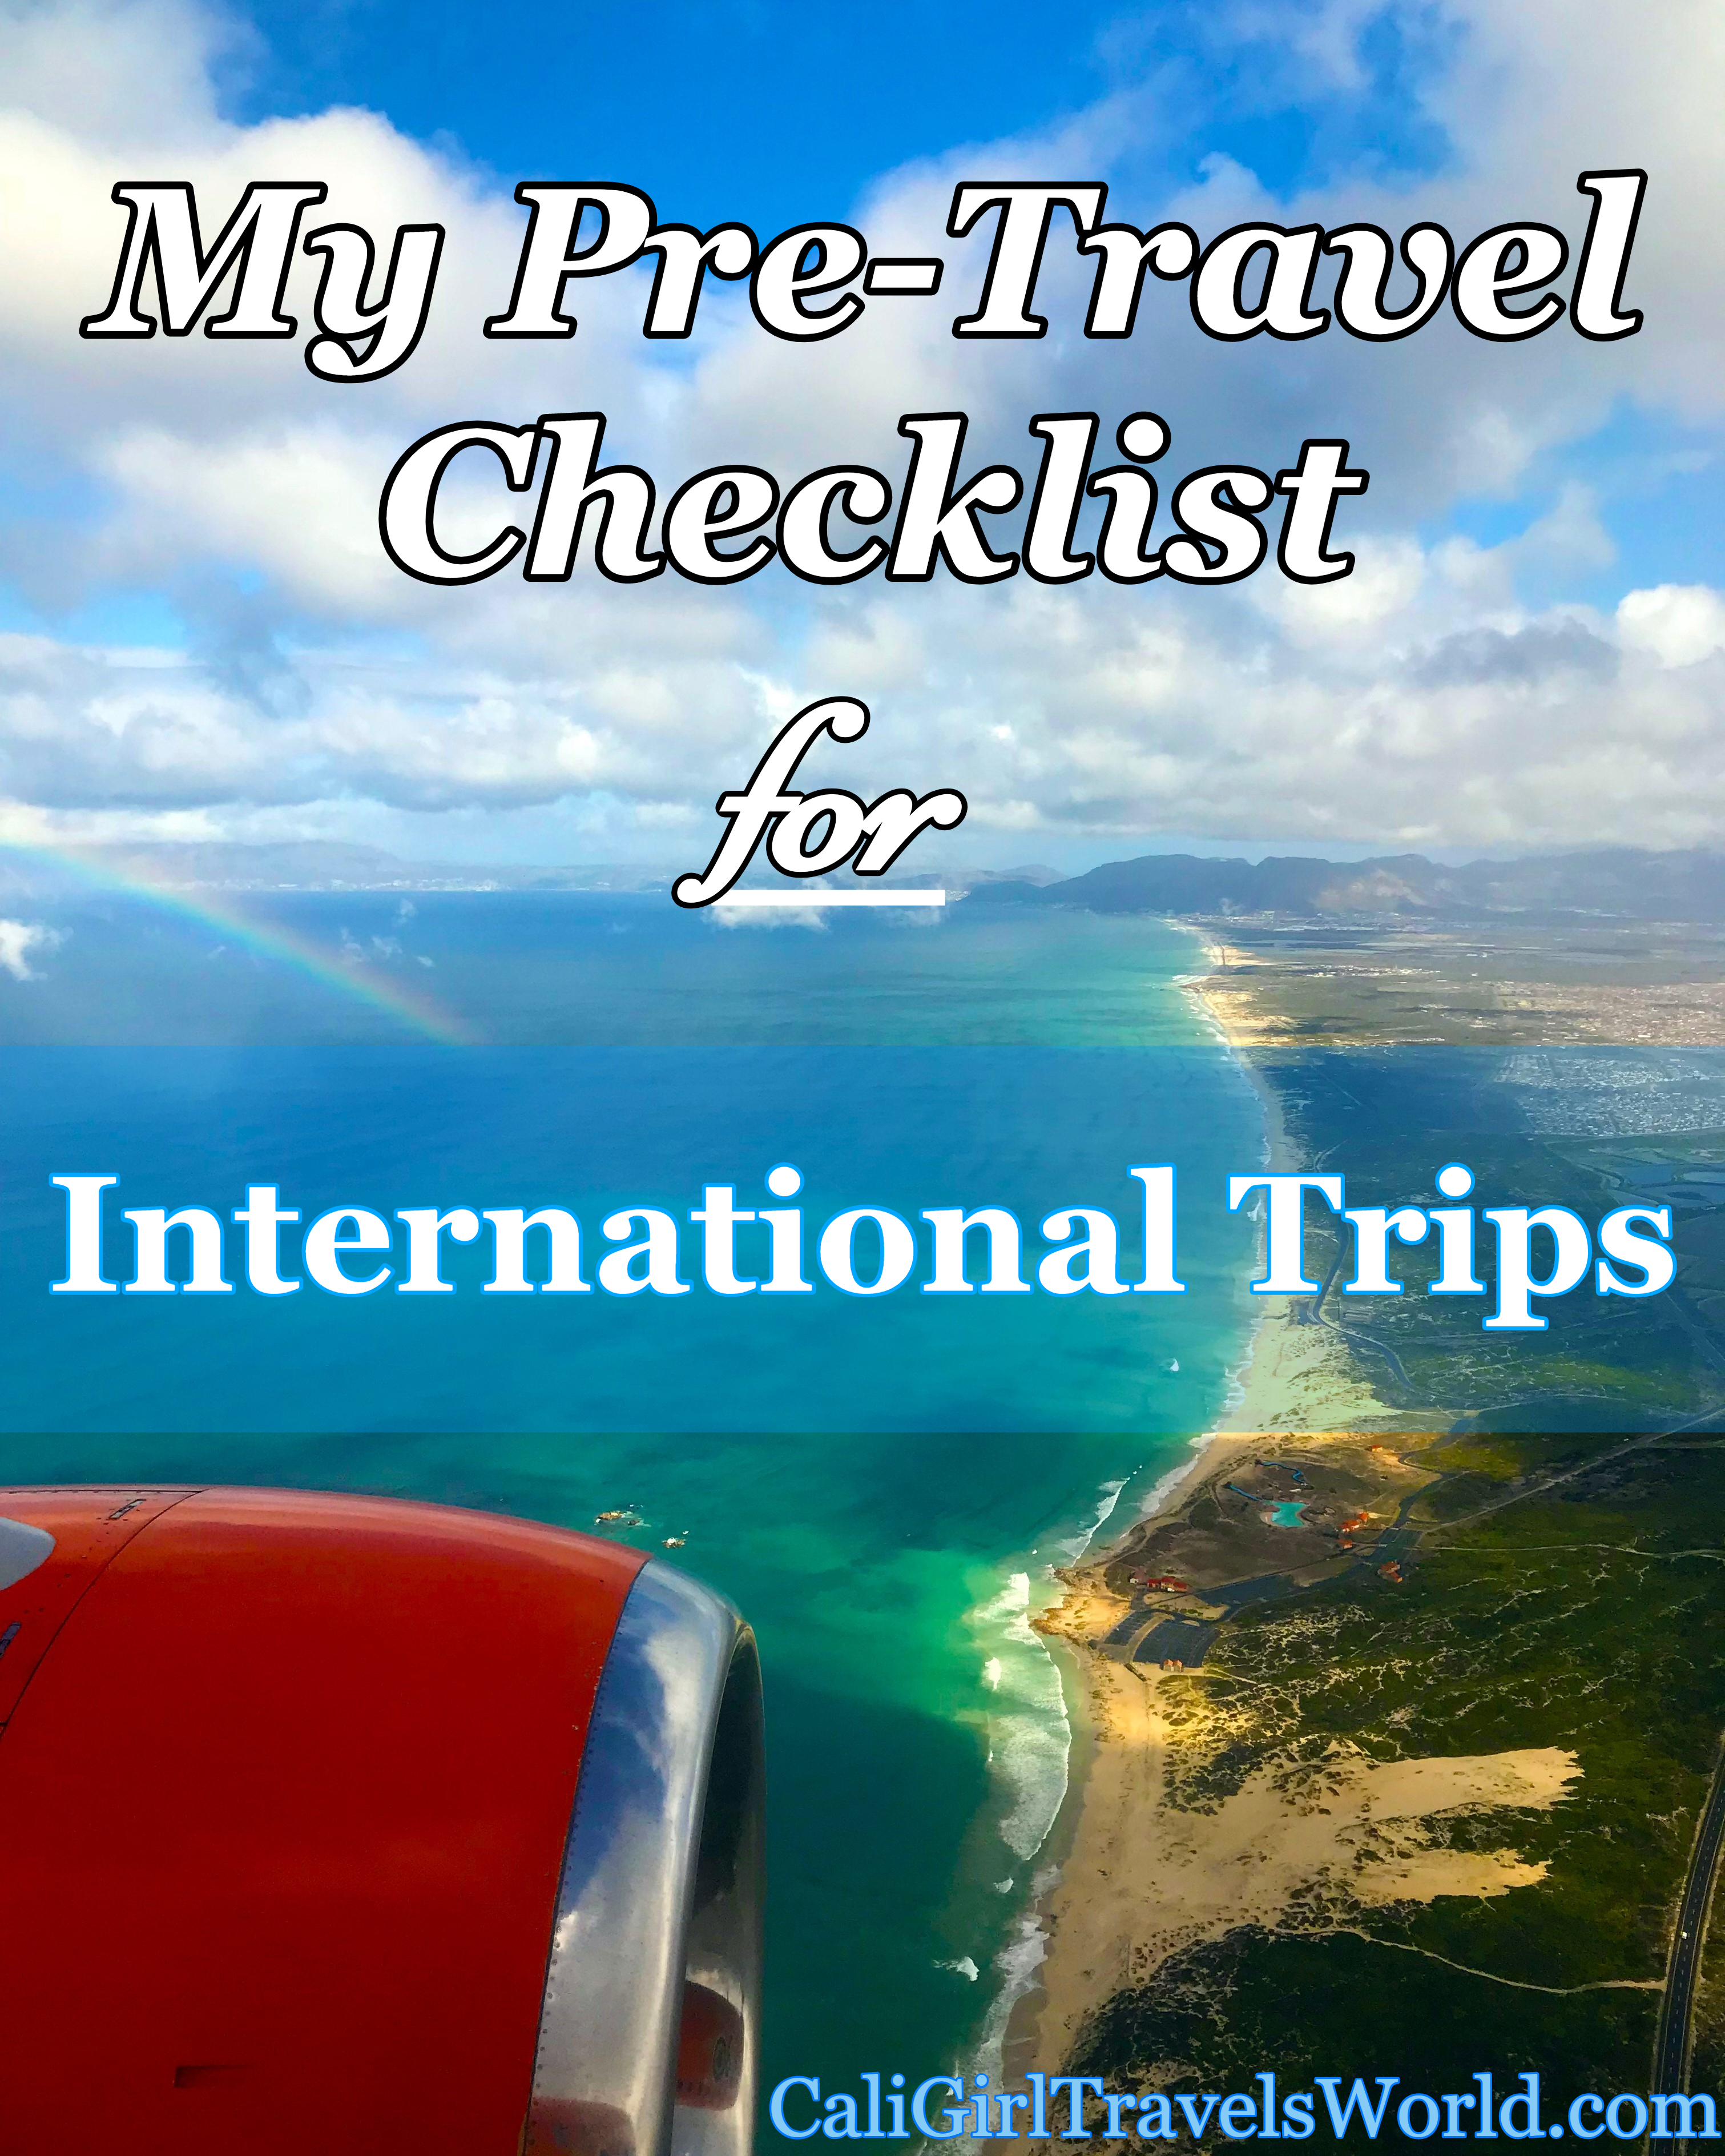 Picture from the window of a red plane looking fown on yellow sand beaches and turquoise waters, this is a pinterest post with my pre-travel checklist for international trips written across.